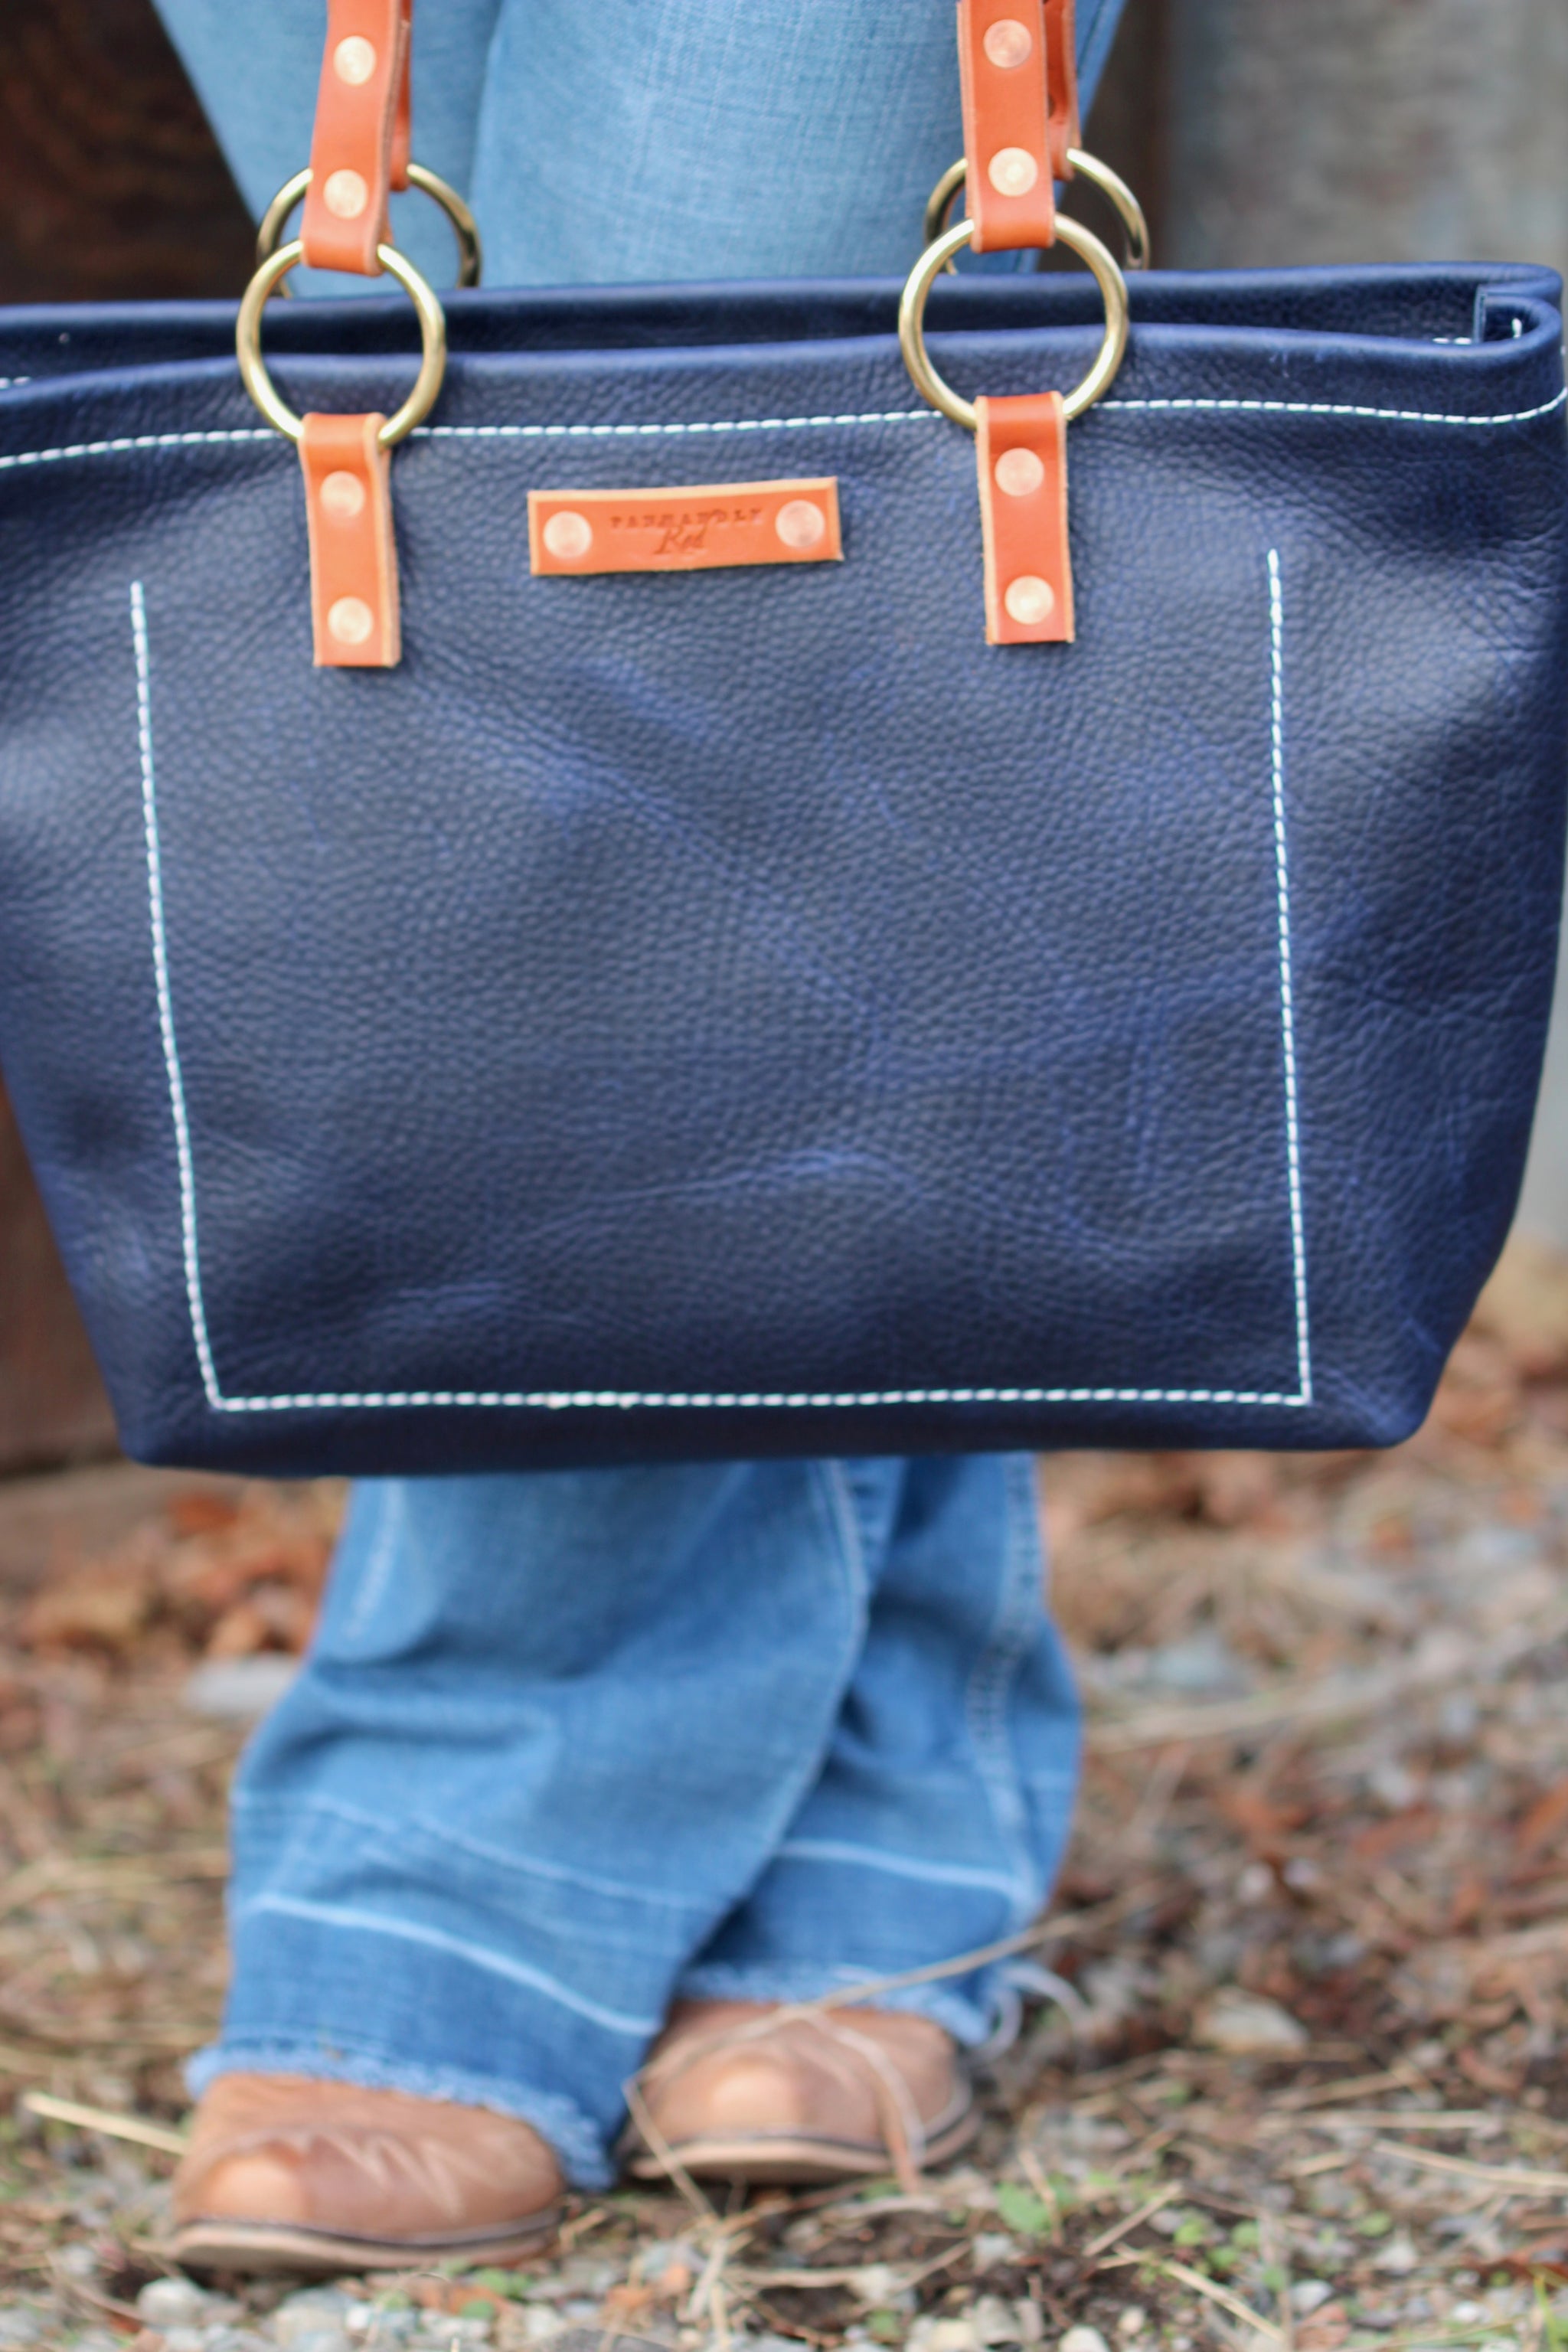 Blue Leather Bag, Blue Leather Tote Bag, Blue Leather Purse, Equestrian Purse, Equestrian Accessories, Purses, handbags, duffles, bags, crossbody purse, gift shop,Panhandle Red Company, Leather Goods, Handbags, Totes, Purses, artisan,  Full-grain leather items, custom gifts, handcrafted gift, idaho shops, leather shop